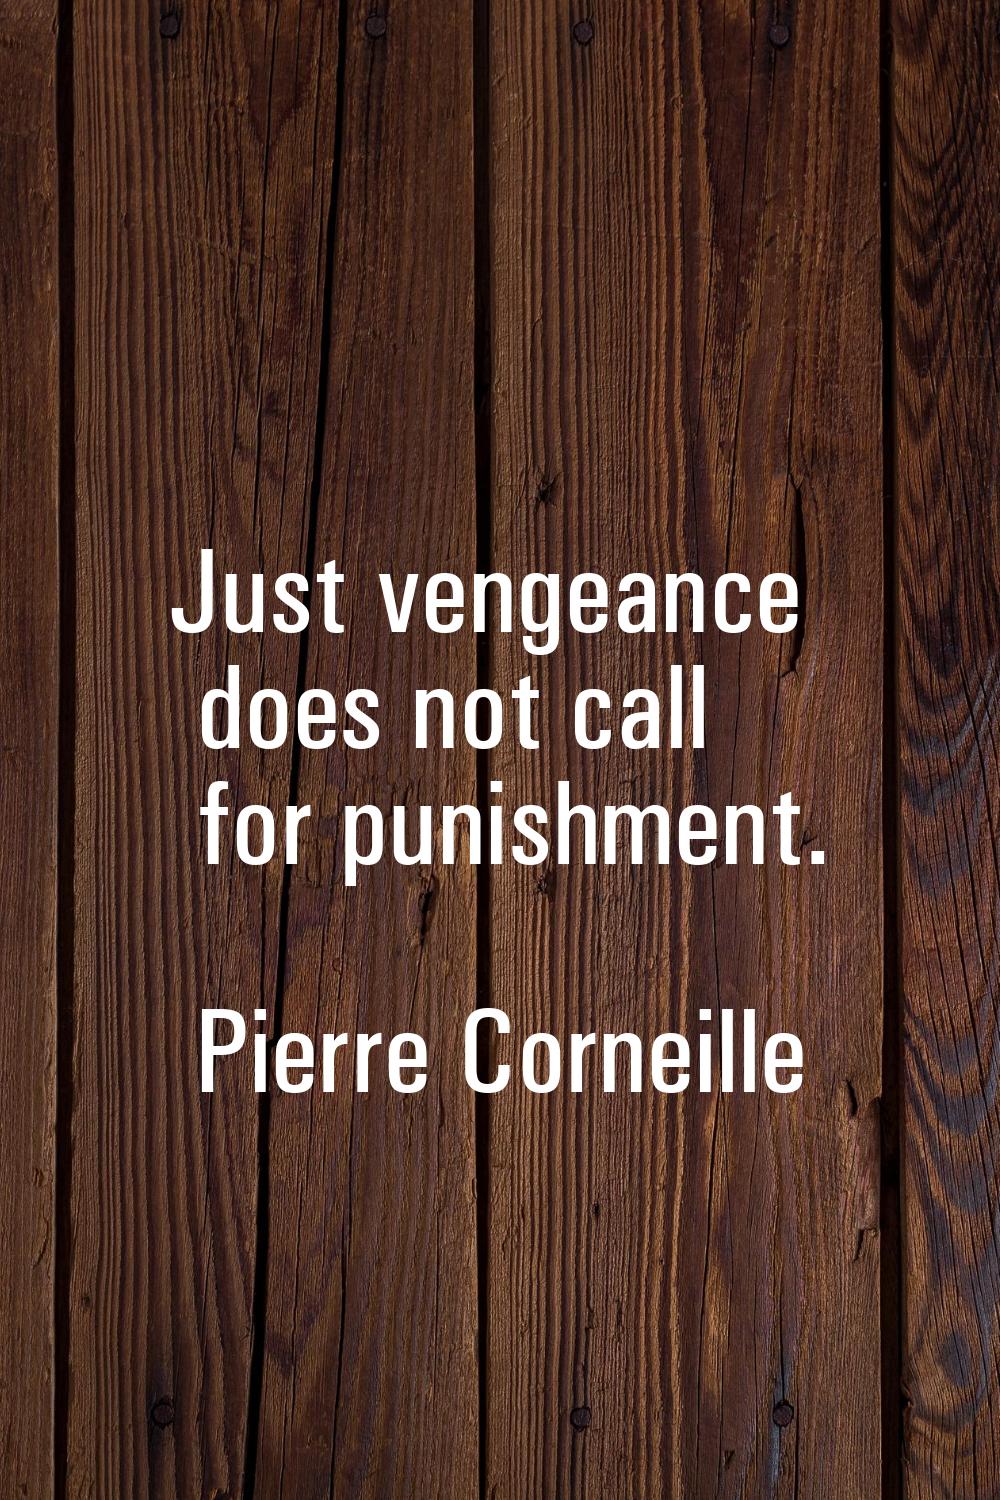 Just vengeance does not call for punishment.